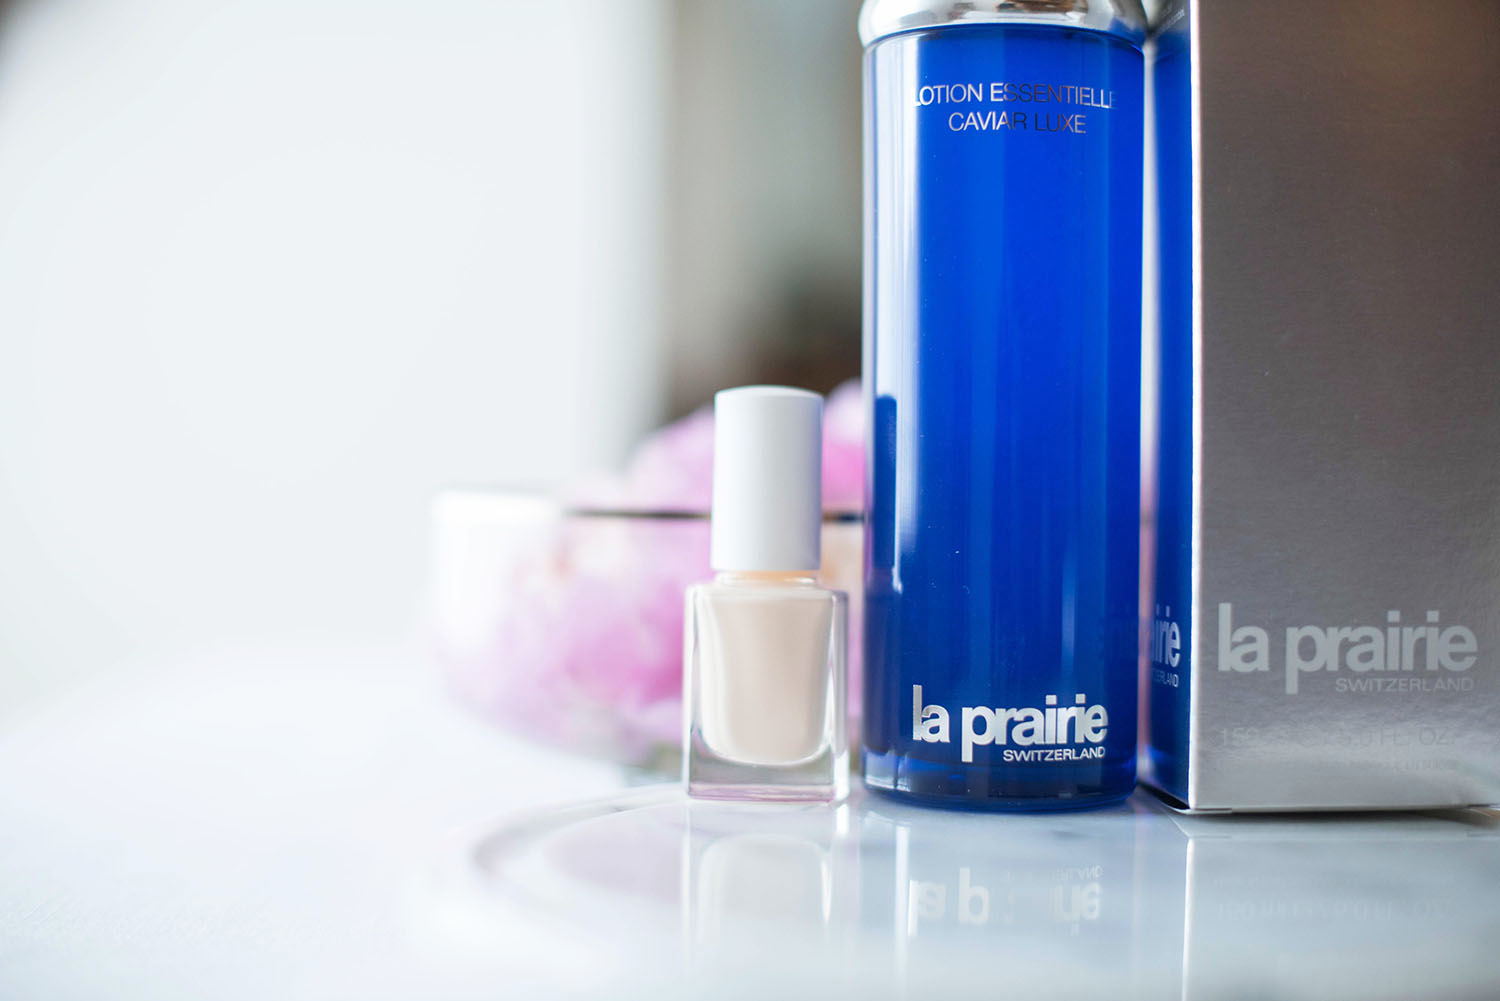 La Prairie skin caviar essence in lotion next to a bottle of nude nail polish, photographed by beauty blogger Cee Fardoe of Coco & Vera